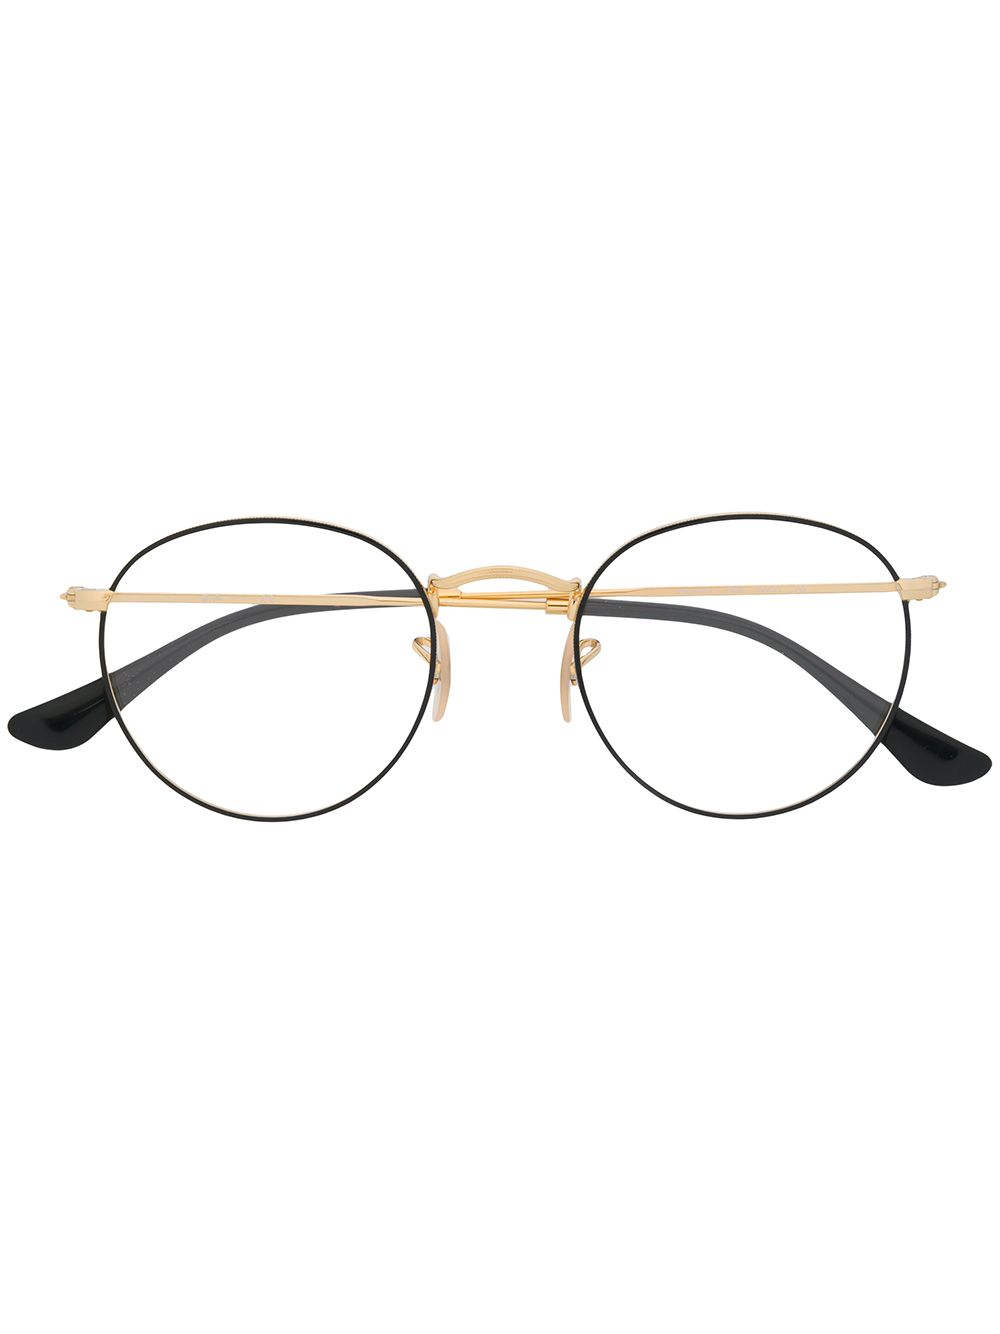 Ray-Ban round framed glasses - Gold von Ray-Ban